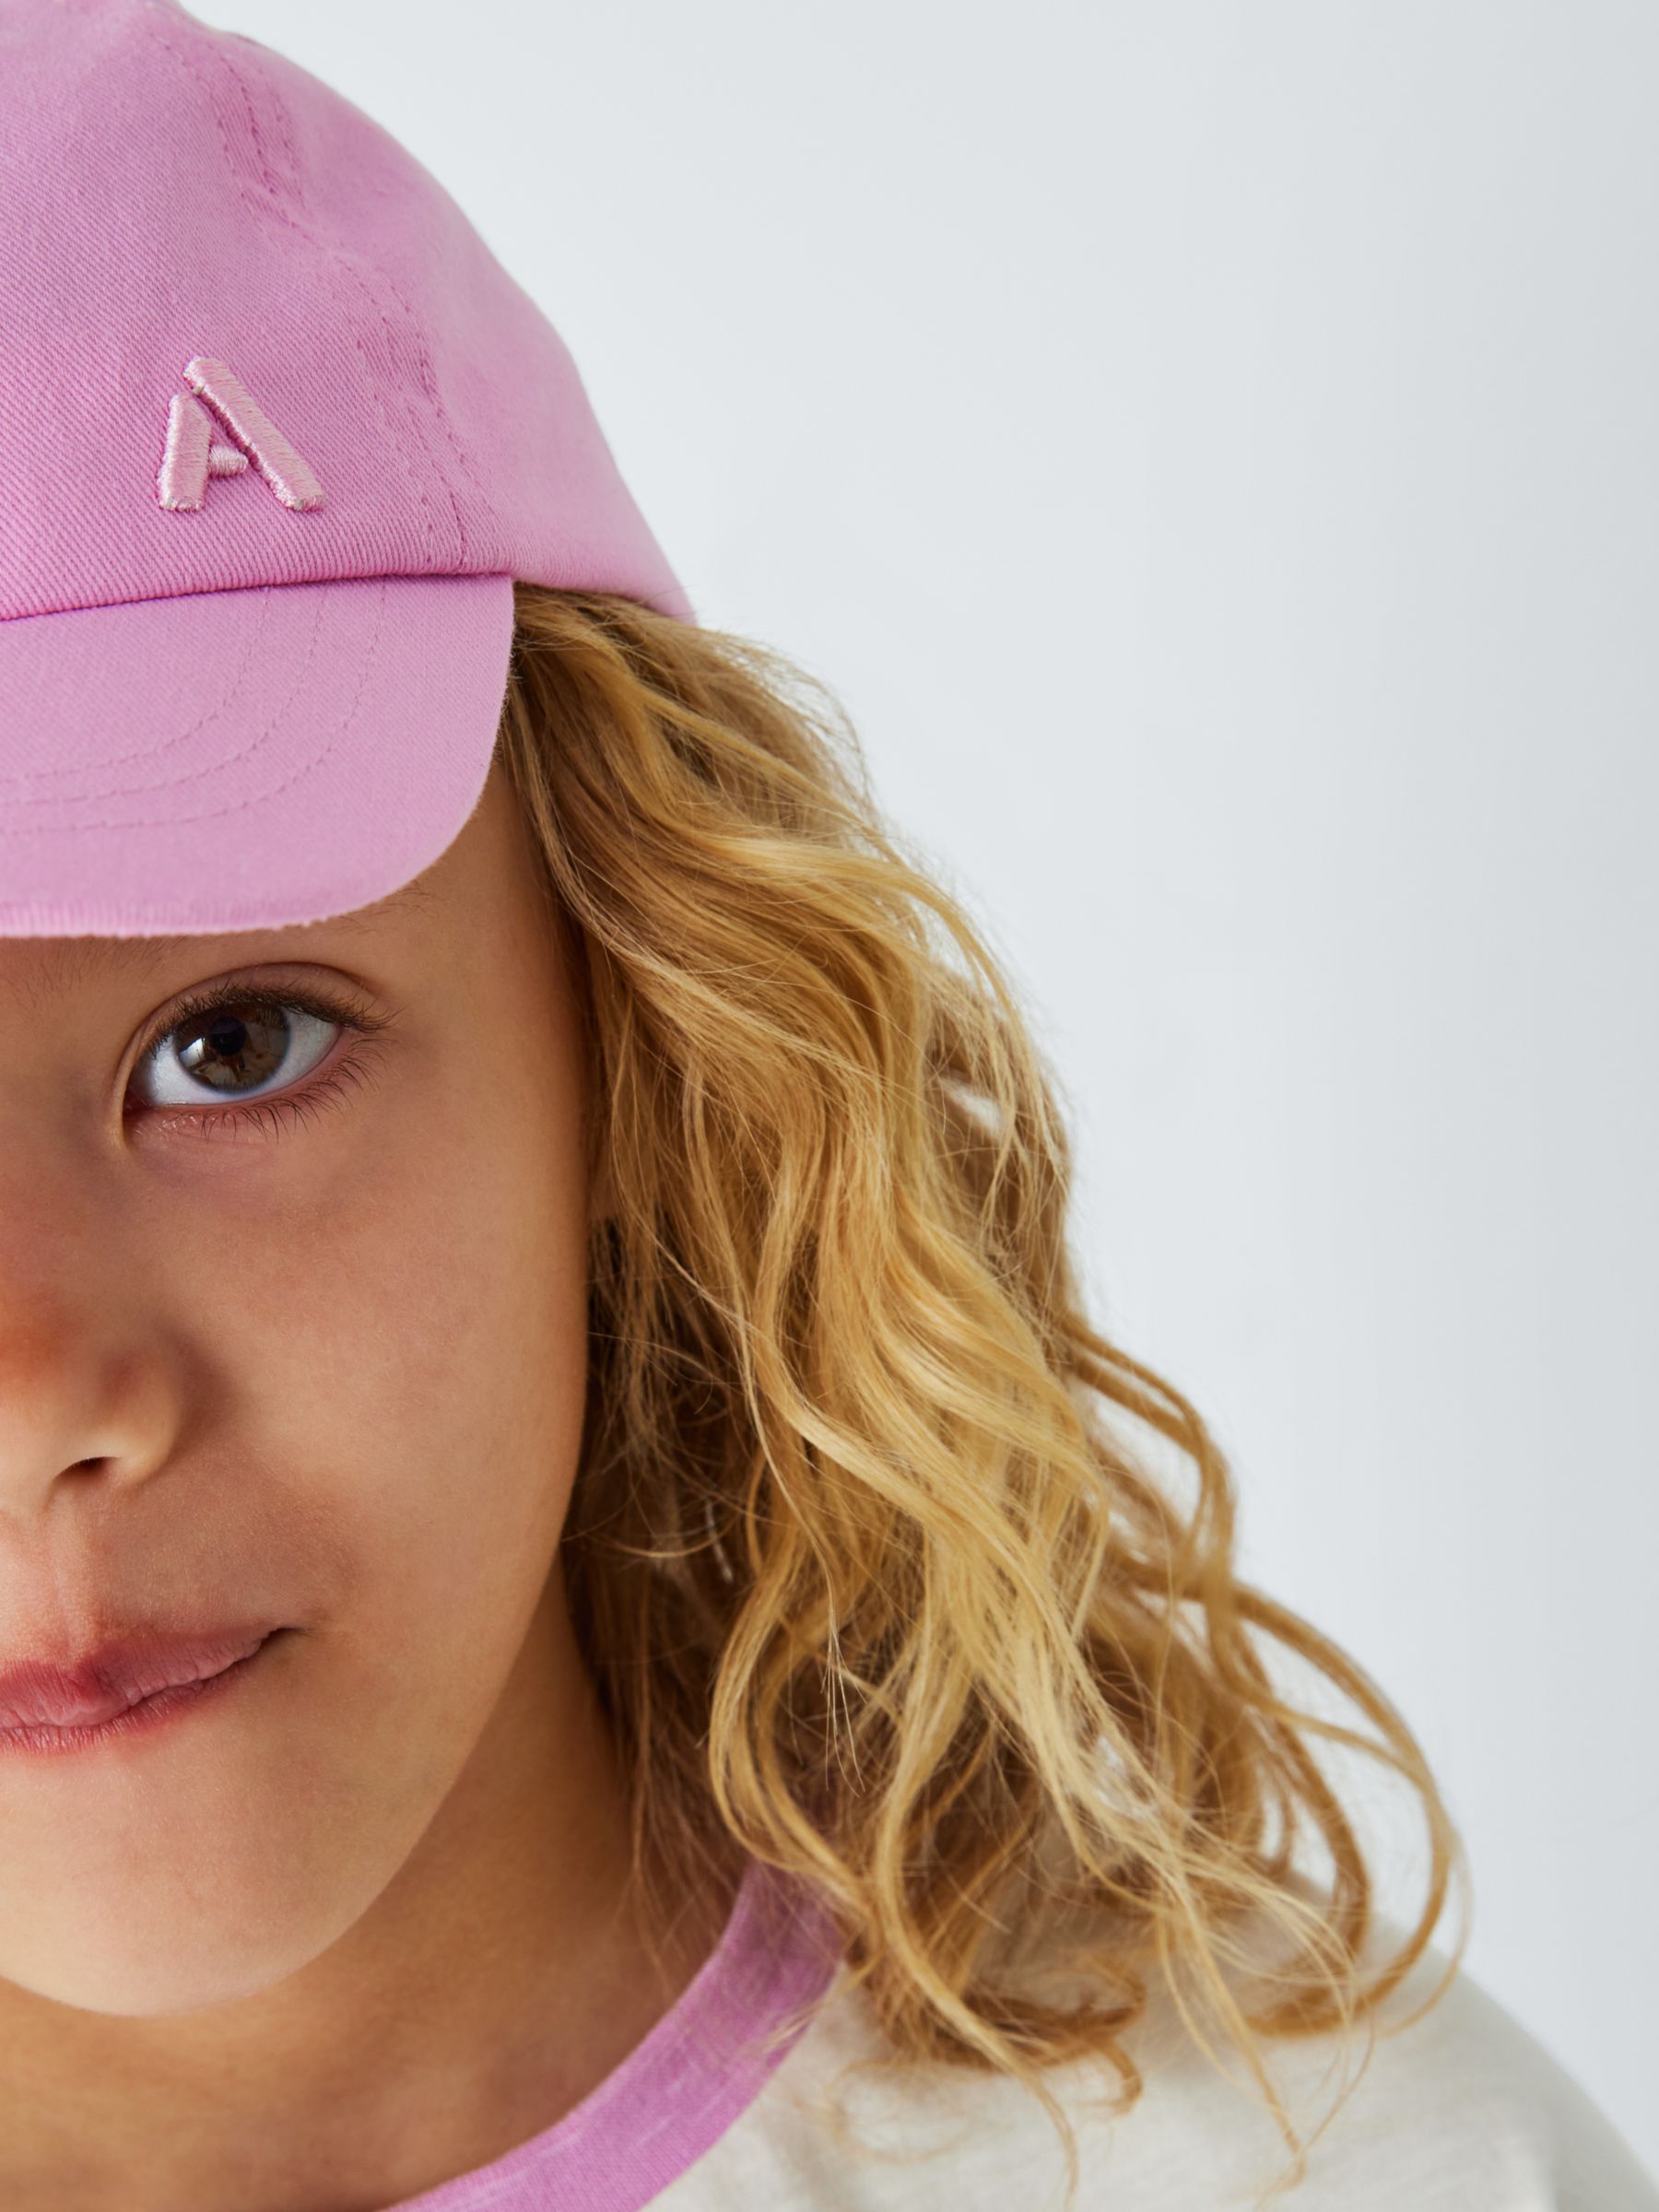 John Lewis ANYDAY Kids' Embroidered Baseball Cap, Pink, 0-6 months